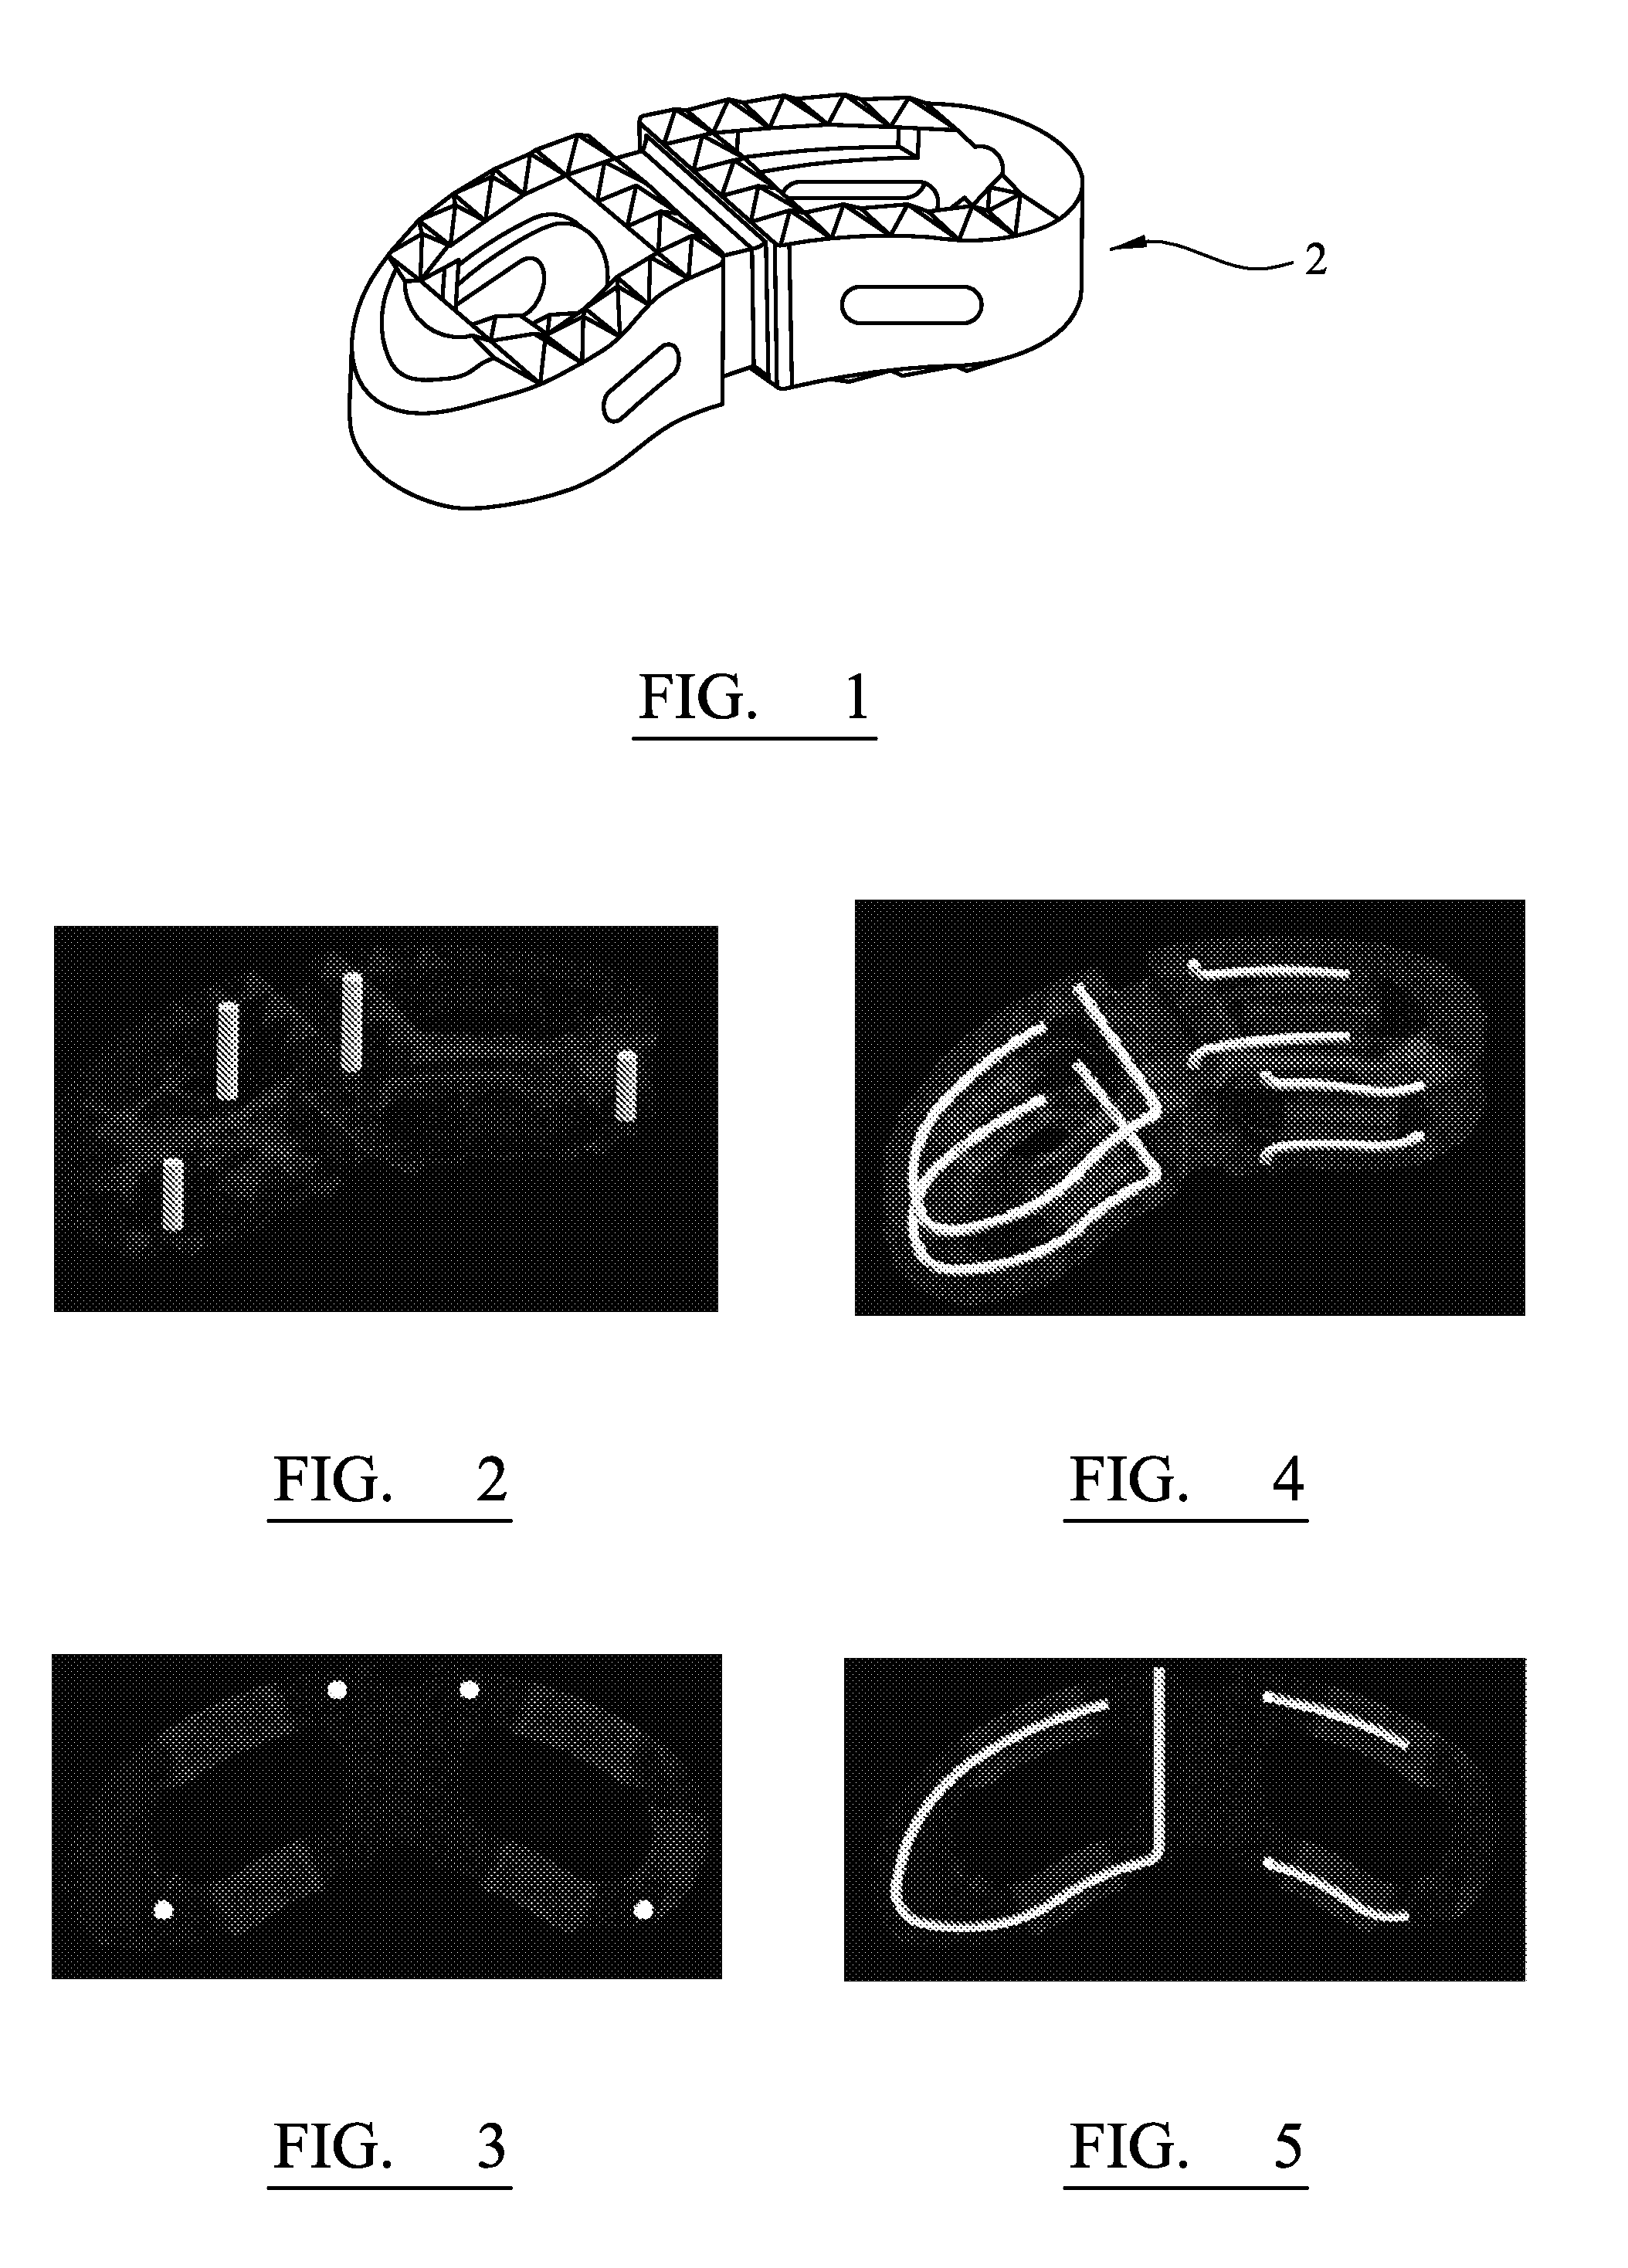 Method for Manufacturing a Medical Implant With a Radiopaque Marker